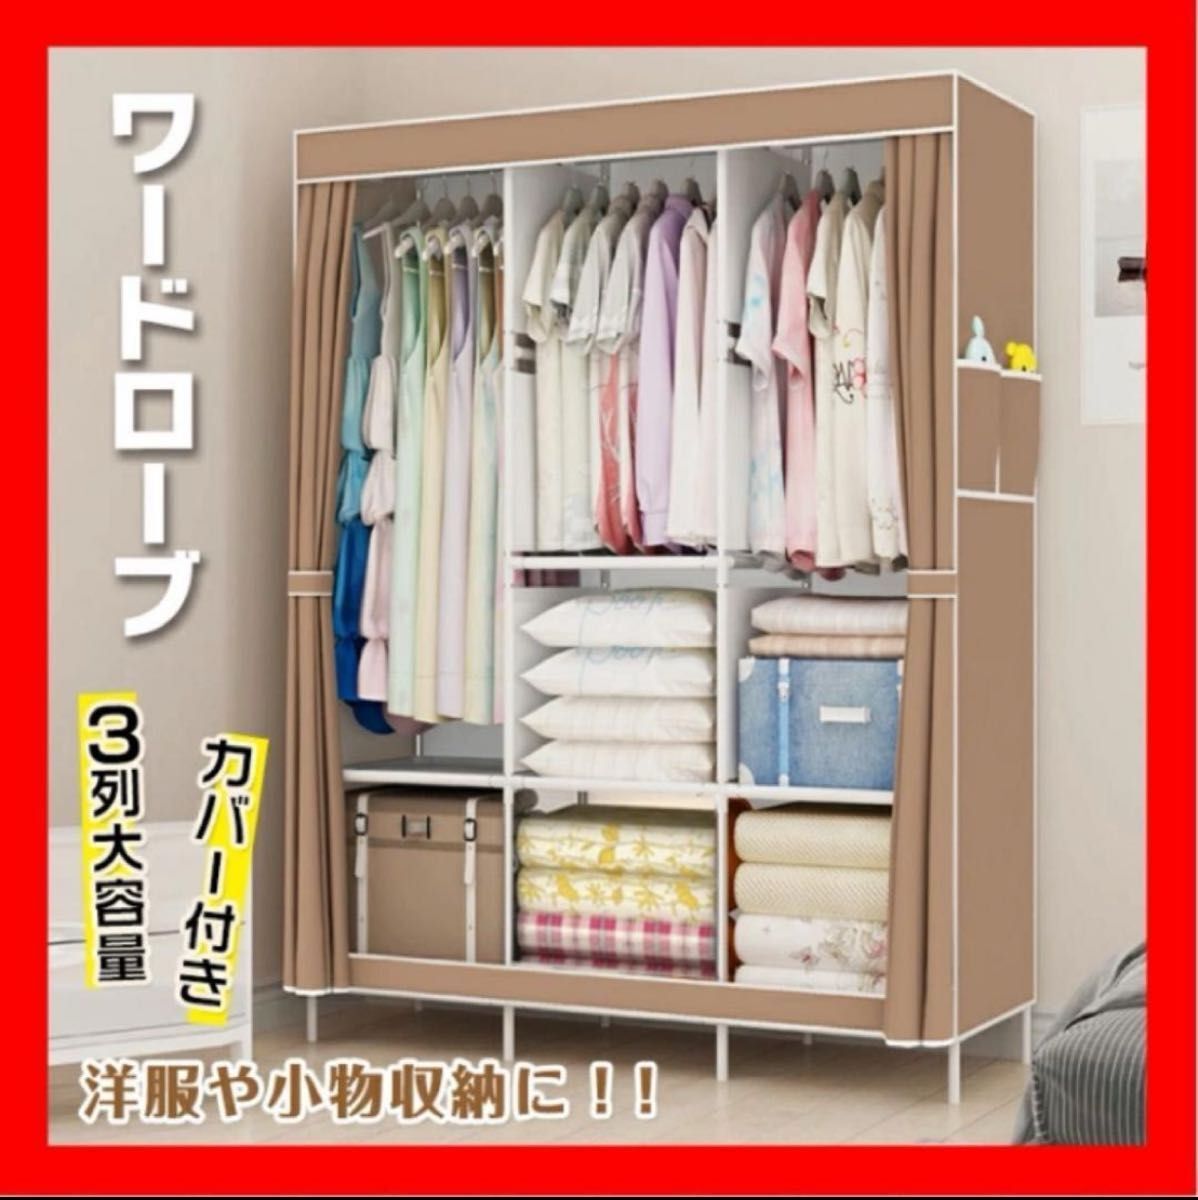  beige wardrobe hanger rack Western-style clothes storage high capacity clothes case shelves 3 row stylish clothes storage shelves assembly type 